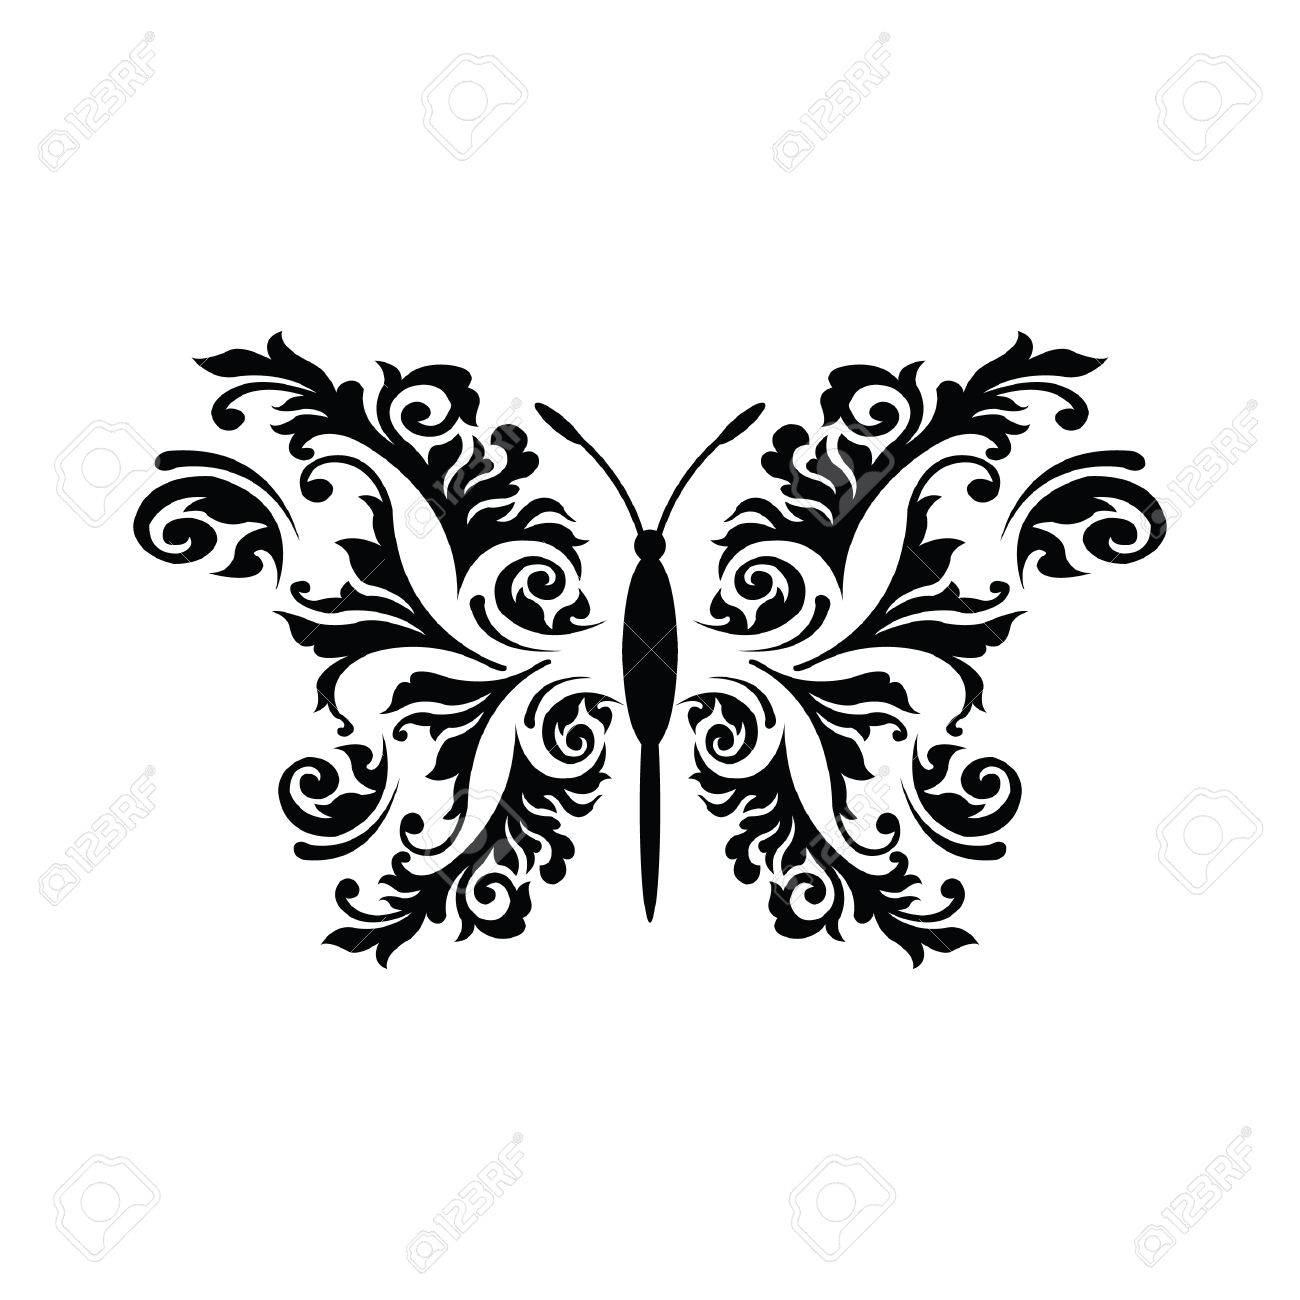 Butterfly Tattoo Design Royalty Free Cliparts Vectors And Stock intended for dimensions 1300 X 1300